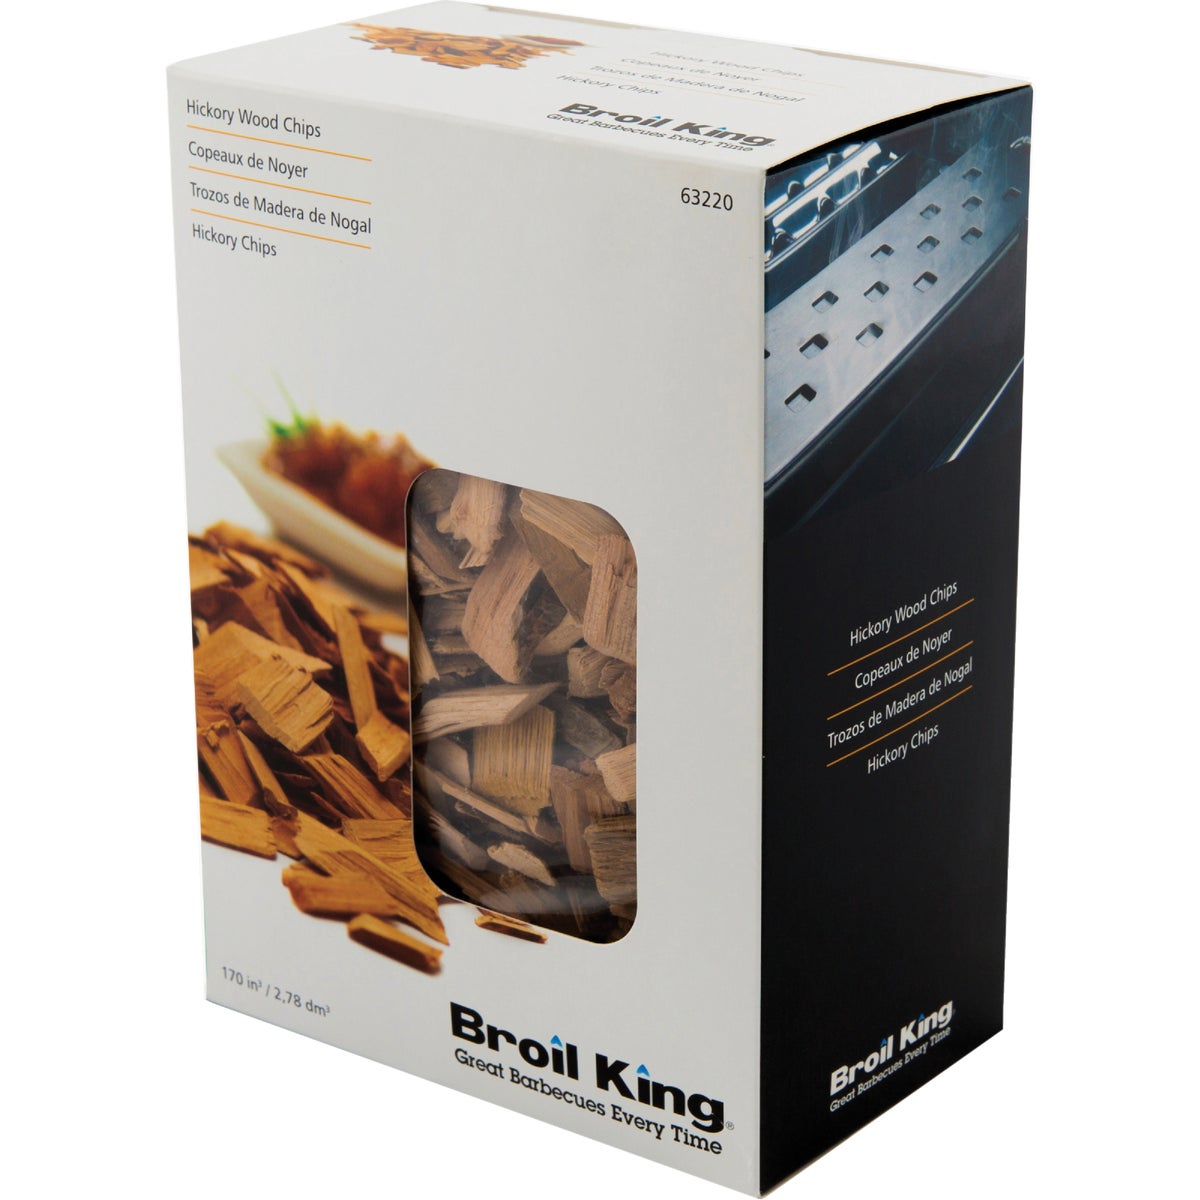 Broil King 170 Cu. In. Hickory Wood Smoking Chips